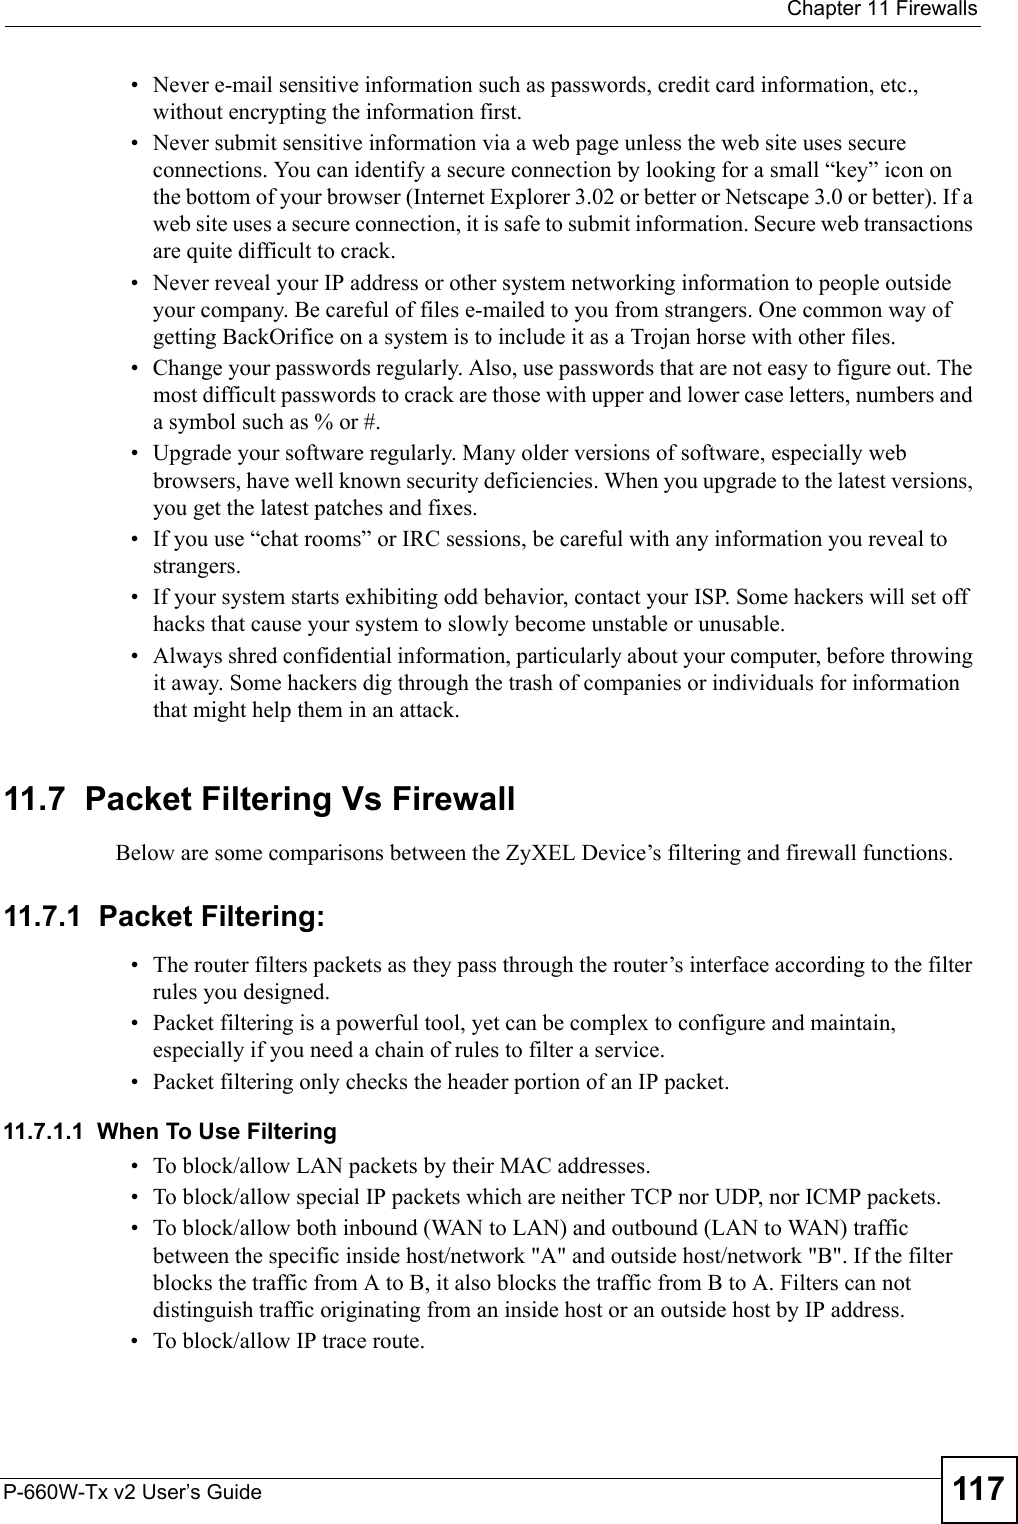  Chapter 11 FirewallsP-660W-Tx v2 User’s Guide 117• Never e-mail sensitive information such as passwords, credit card information, etc., without encrypting the information first.• Never submit sensitive information via a web page unless the web site uses secure connections. You can identify a secure connection by looking for a small “key” icon on the bottom of your browser (Internet Explorer 3.02 or better or Netscape 3.0 or better). If a web site uses a secure connection, it is safe to submit information. Secure web transactions are quite difficult to crack.• Never reveal your IP address or other system networking information to people outside your company. Be careful of files e-mailed to you from strangers. One common way of getting BackOrifice on a system is to include it as a Trojan horse with other files.• Change your passwords regularly. Also, use passwords that are not easy to figure out. The most difficult passwords to crack are those with upper and lower case letters, numbers and a symbol such as % or #.• Upgrade your software regularly. Many older versions of software, especially web browsers, have well known security deficiencies. When you upgrade to the latest versions, you get the latest patches and fixes.• If you use “chat rooms” or IRC sessions, be careful with any information you reveal to strangers.• If your system starts exhibiting odd behavior, contact your ISP. Some hackers will set off hacks that cause your system to slowly become unstable or unusable. • Always shred confidential information, particularly about your computer, before throwing it away. Some hackers dig through the trash of companies or individuals for information that might help them in an attack.11.7  Packet Filtering Vs FirewallBelow are some comparisons between the ZyXEL Device’s filtering and firewall functions.11.7.1  Packet Filtering:• The router filters packets as they pass through the router’s interface according to the filter rules you designed.• Packet filtering is a powerful tool, yet can be complex to configure and maintain, especially if you need a chain of rules to filter a service.• Packet filtering only checks the header portion of an IP packet.11.7.1.1  When To Use Filtering• To block/allow LAN packets by their MAC addresses.• To block/allow special IP packets which are neither TCP nor UDP, nor ICMP packets.• To block/allow both inbound (WAN to LAN) and outbound (LAN to WAN) traffic between the specific inside host/network &quot;A&quot; and outside host/network &quot;B&quot;. If the filter blocks the traffic from A to B, it also blocks the traffic from B to A. Filters can not distinguish traffic originating from an inside host or an outside host by IP address.• To block/allow IP trace route.